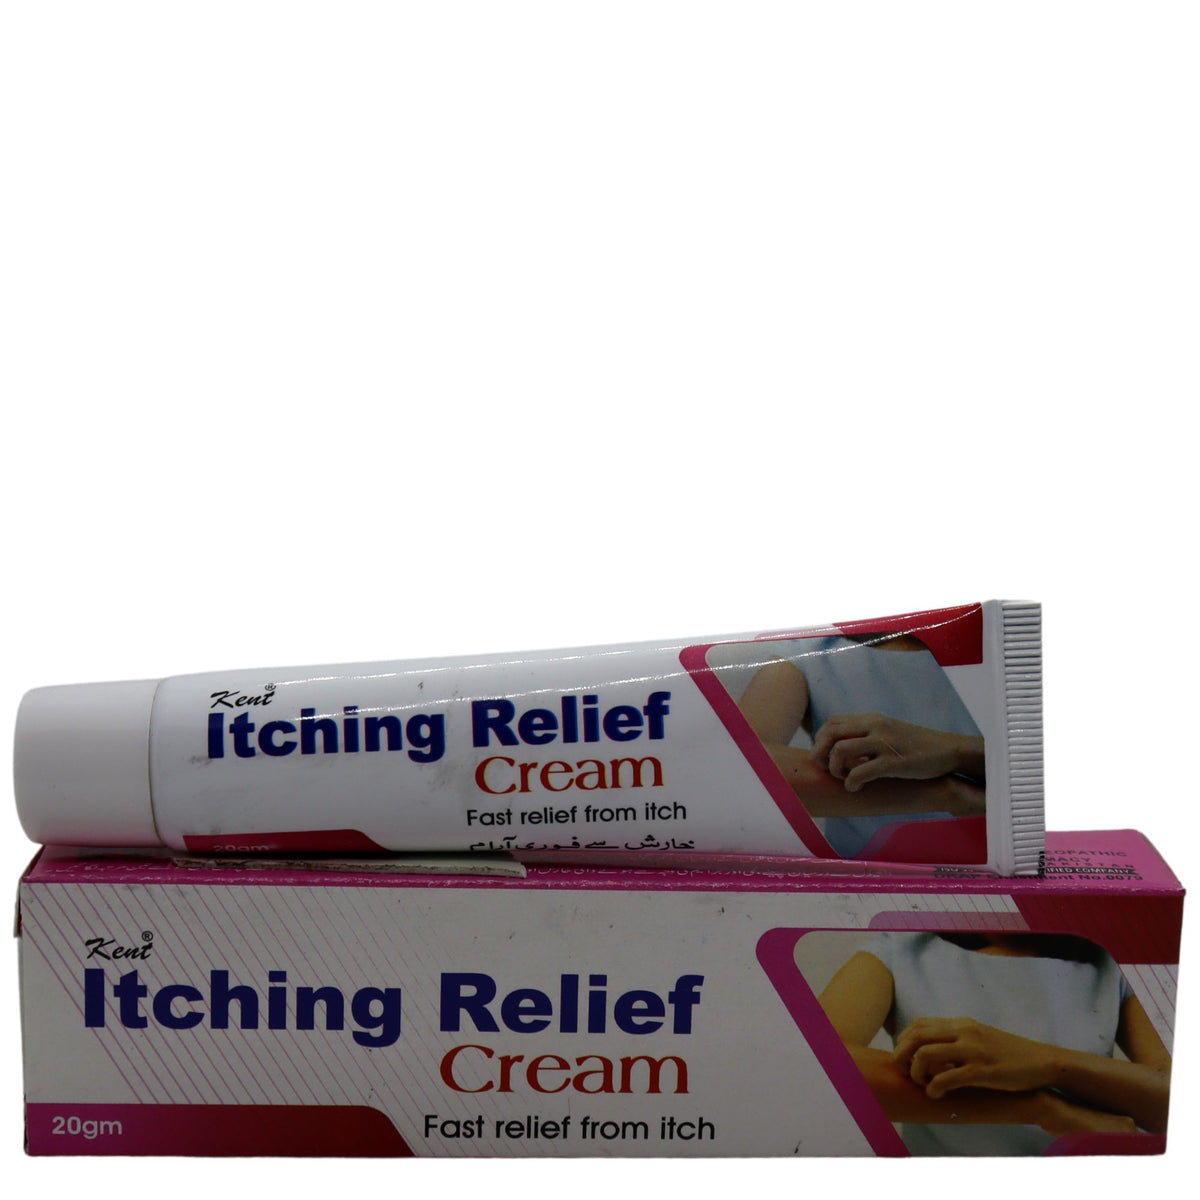 Itching Relief Cream